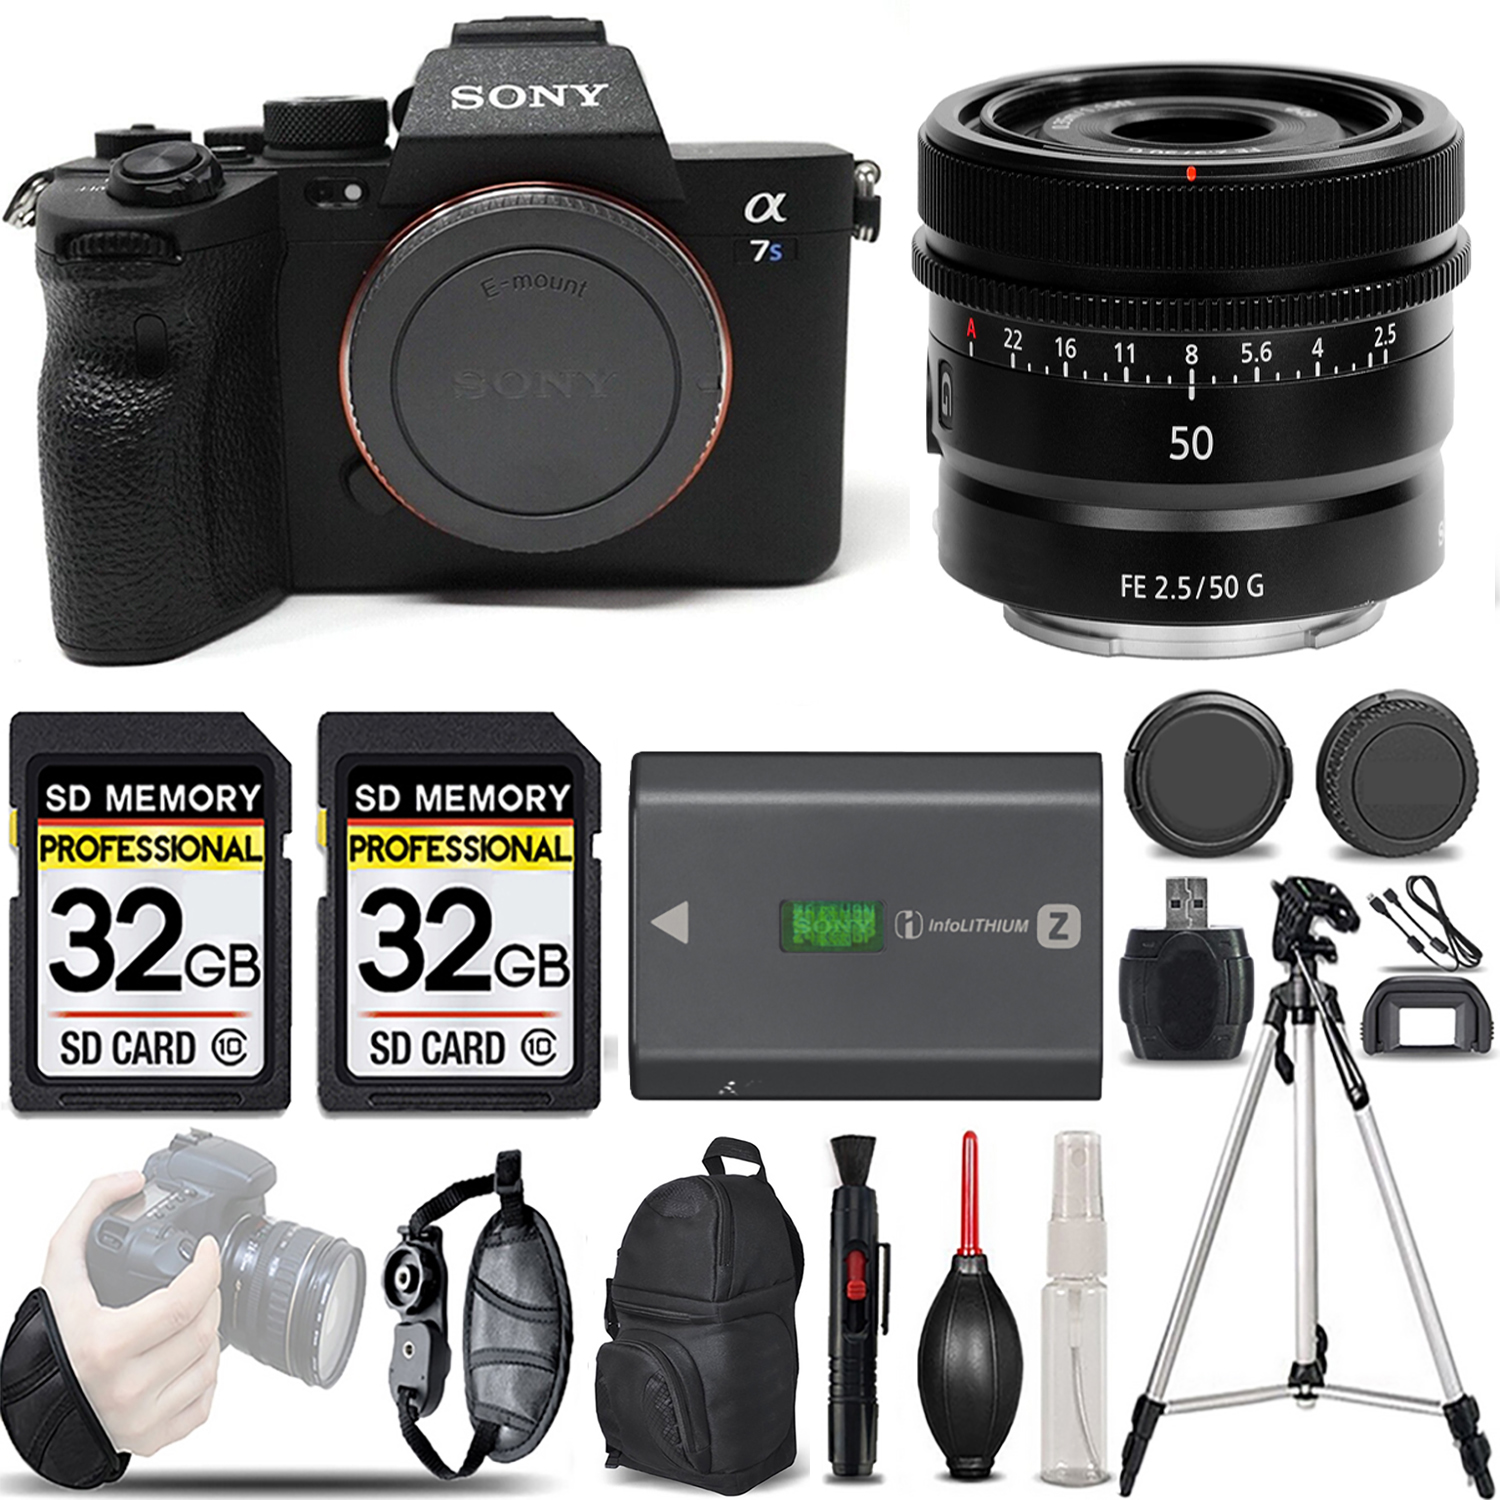 a7S III Mirrorless Camera + 50mm Lens + Bag + Extra Battery + 64GB Kit *FREE SHIPPING*